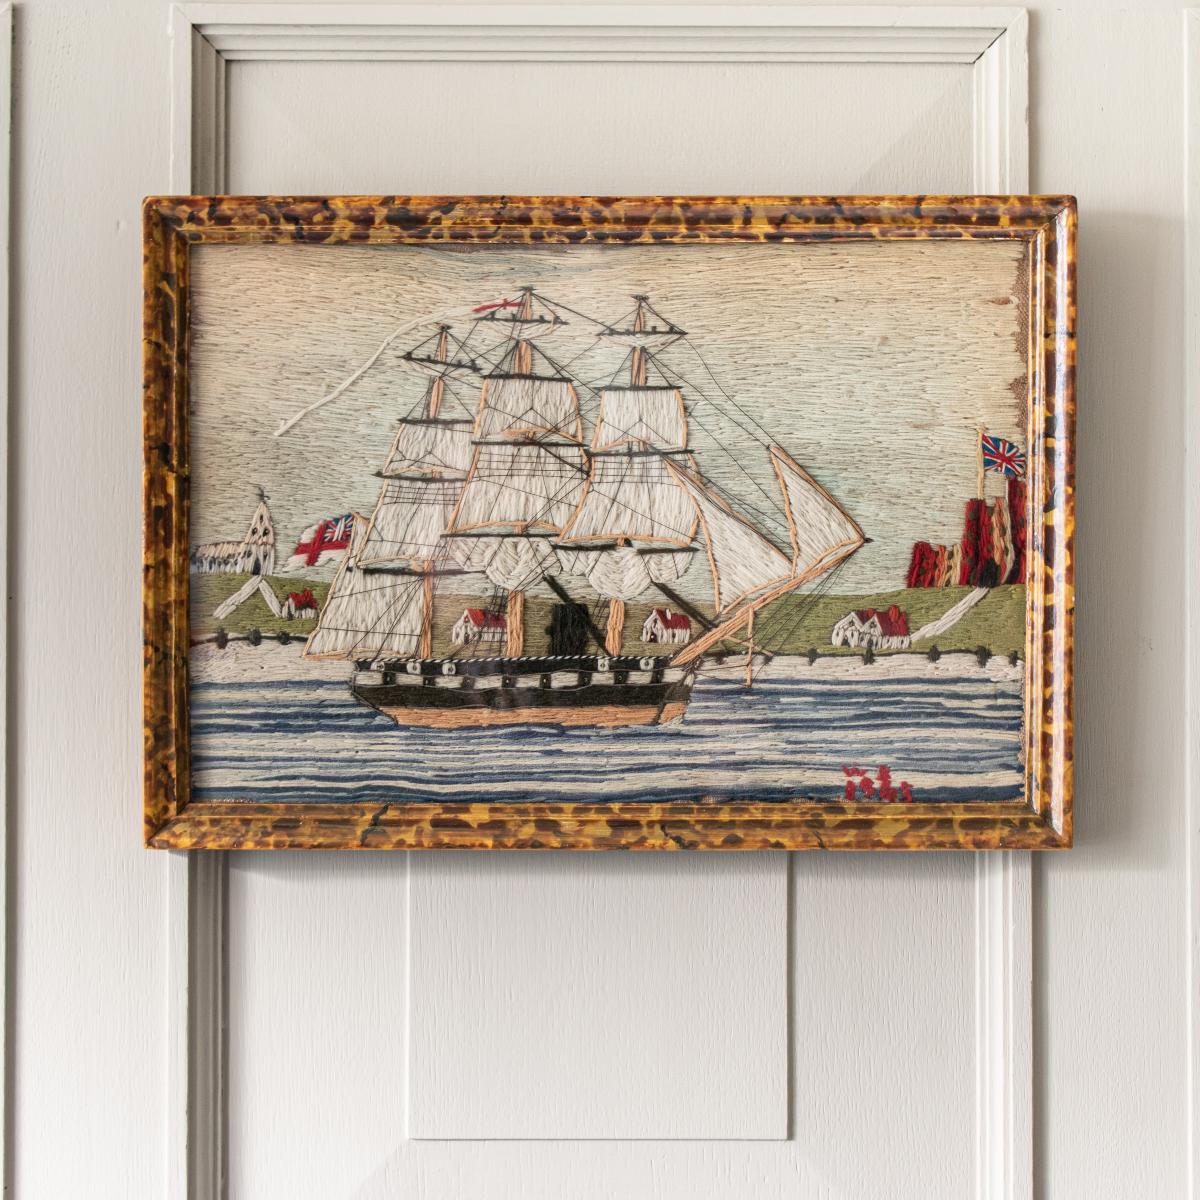 A 19th century wool embroidery of a ship in a painted frame